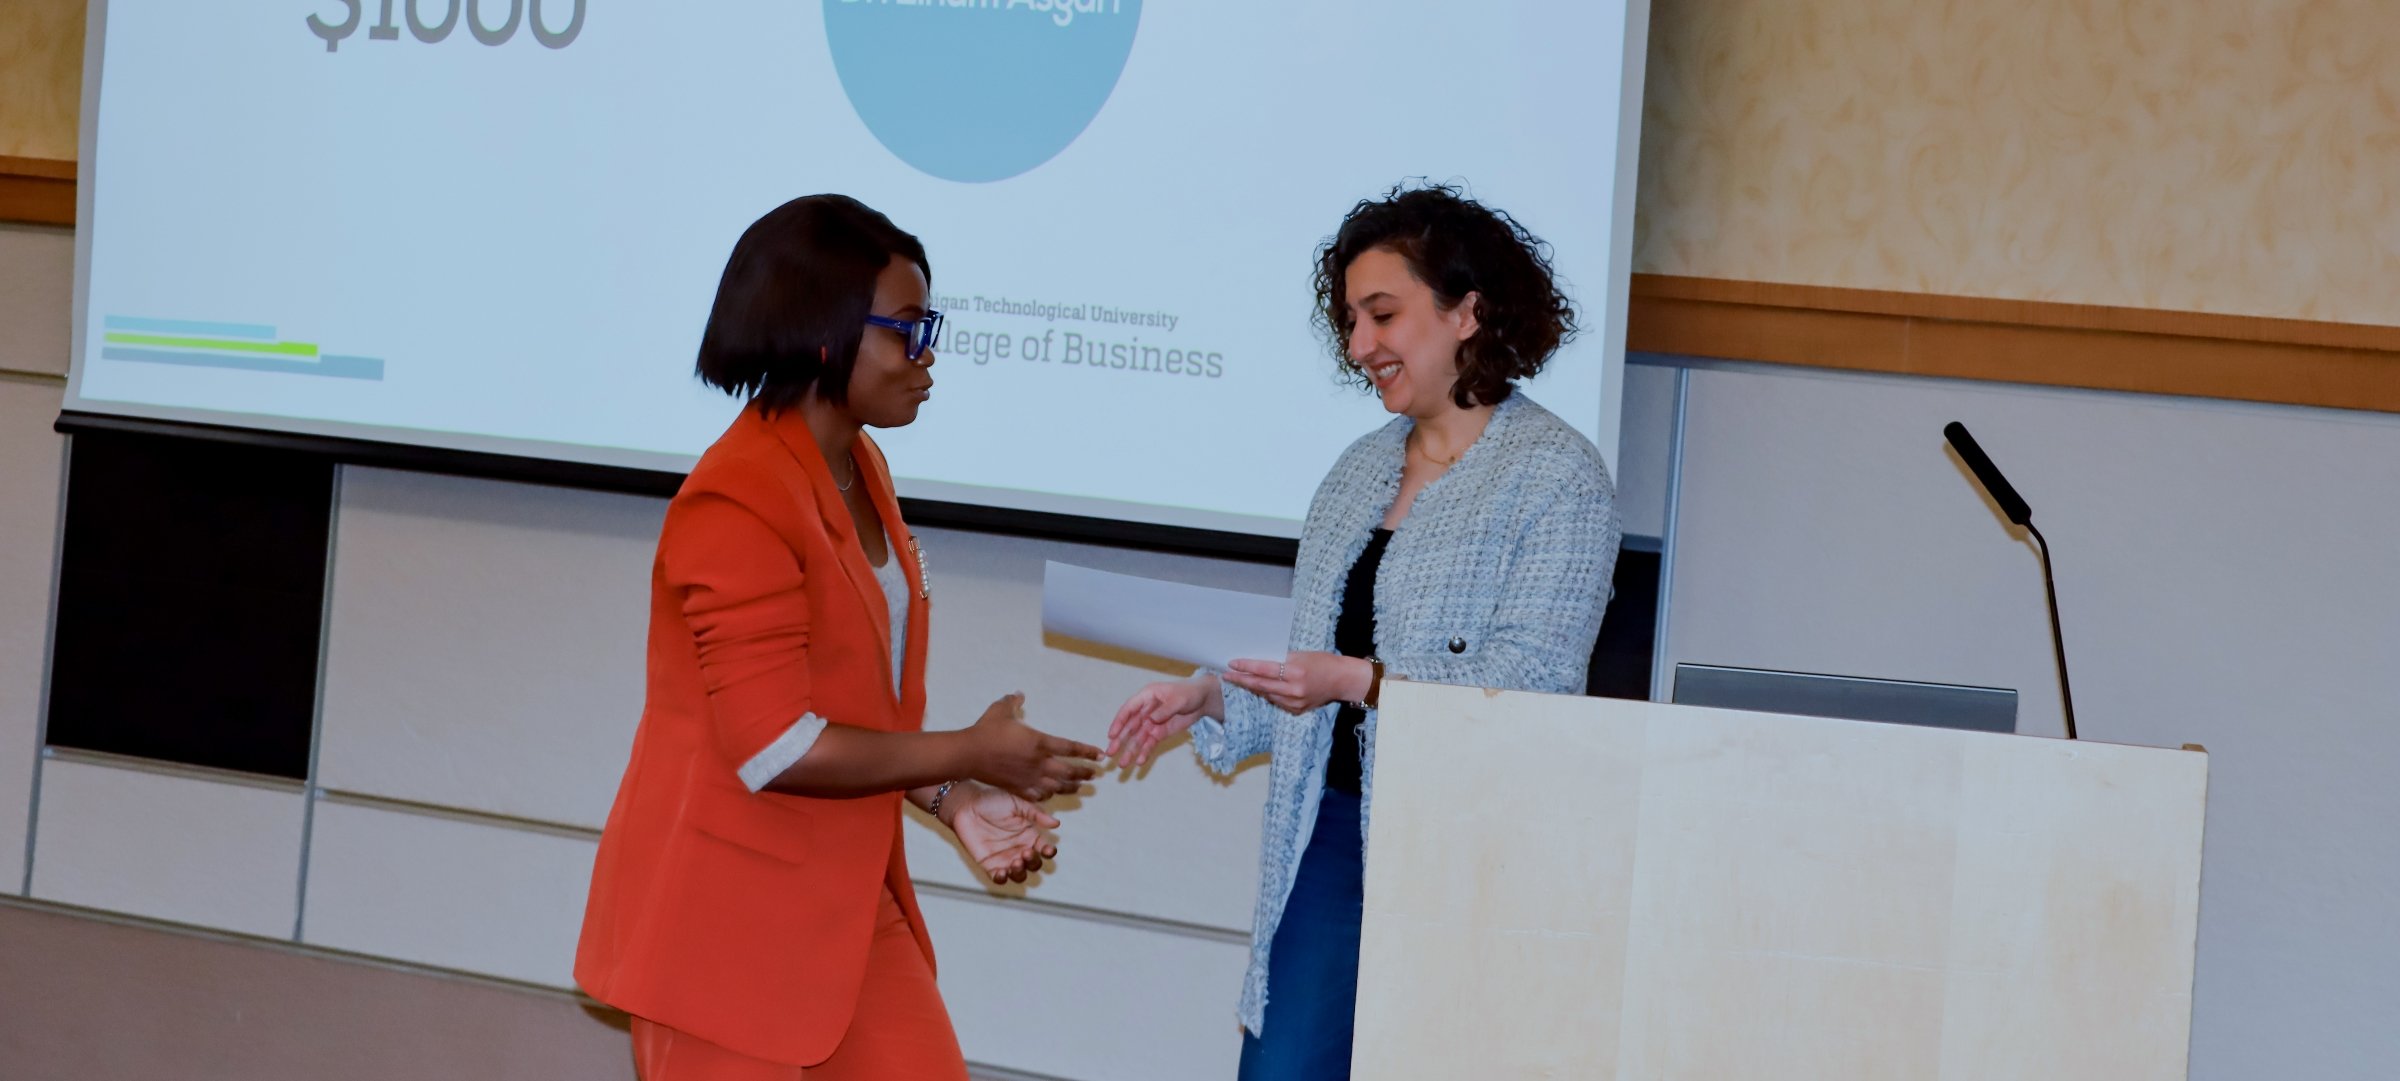 Student receiving an award from a business leader.